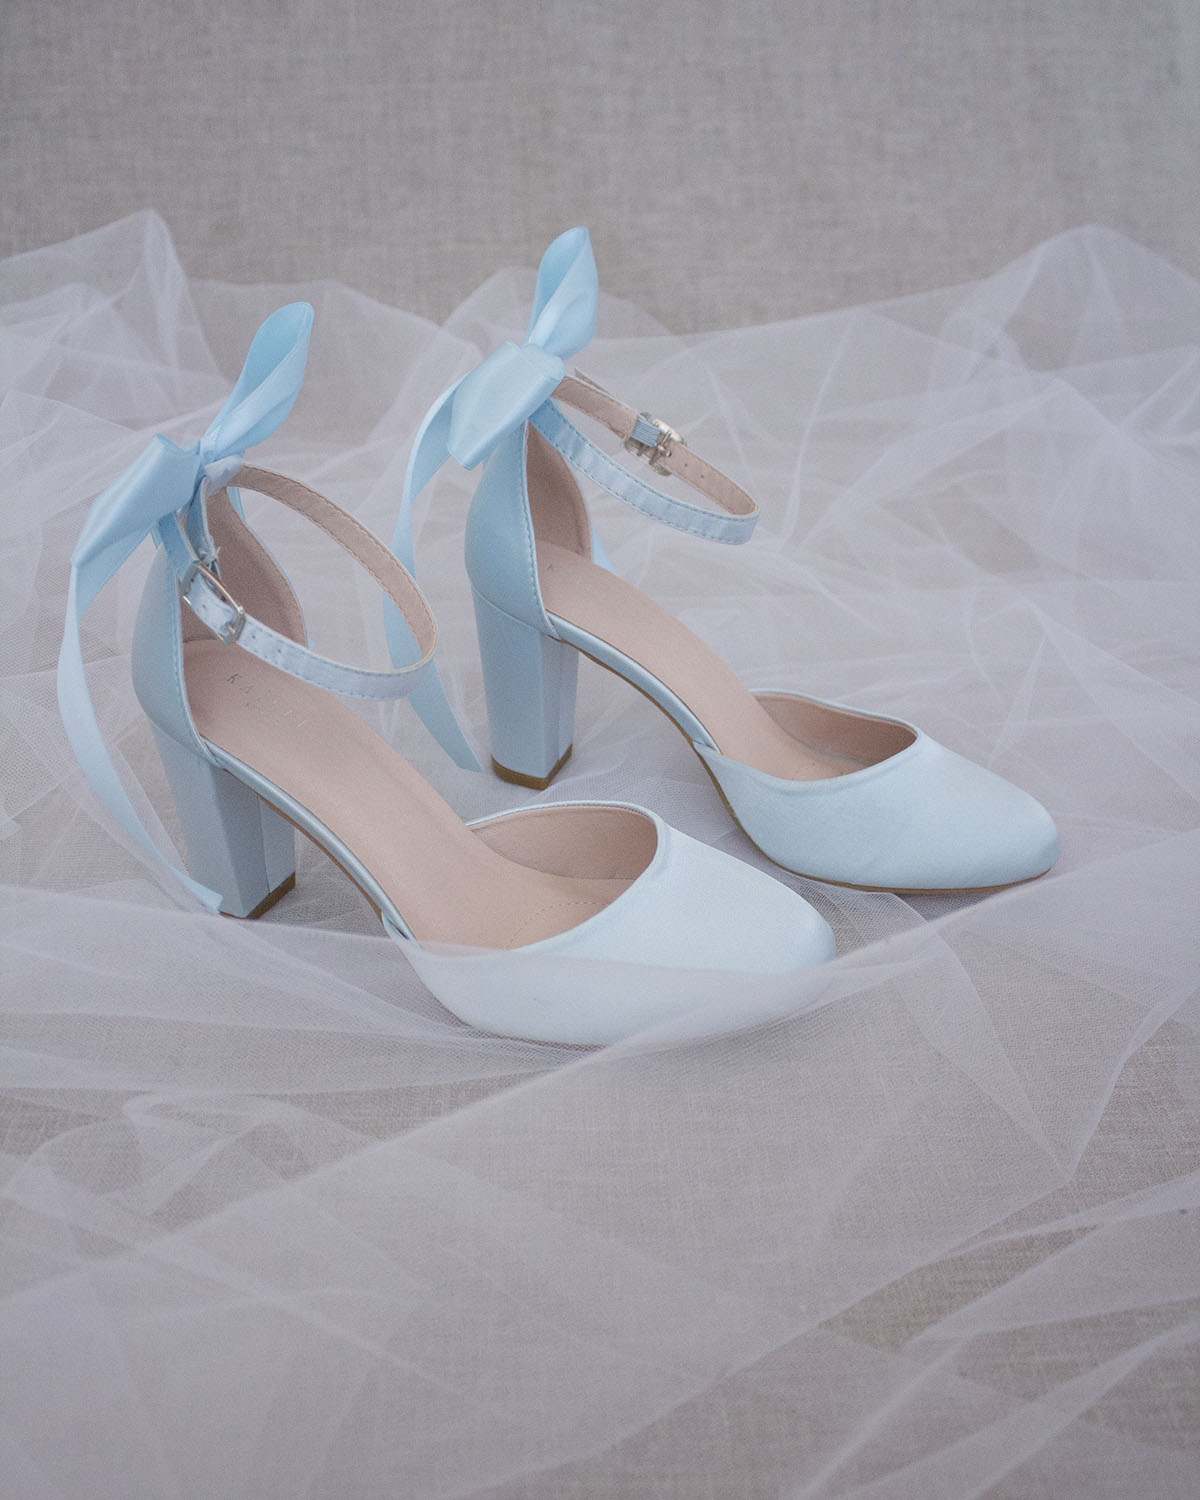 Light Blue Satin Pointy Toe Pump Low Heel with Satin Bow - Bridesmaids Shoes,  Bridal Shoes, Wedding Shoes